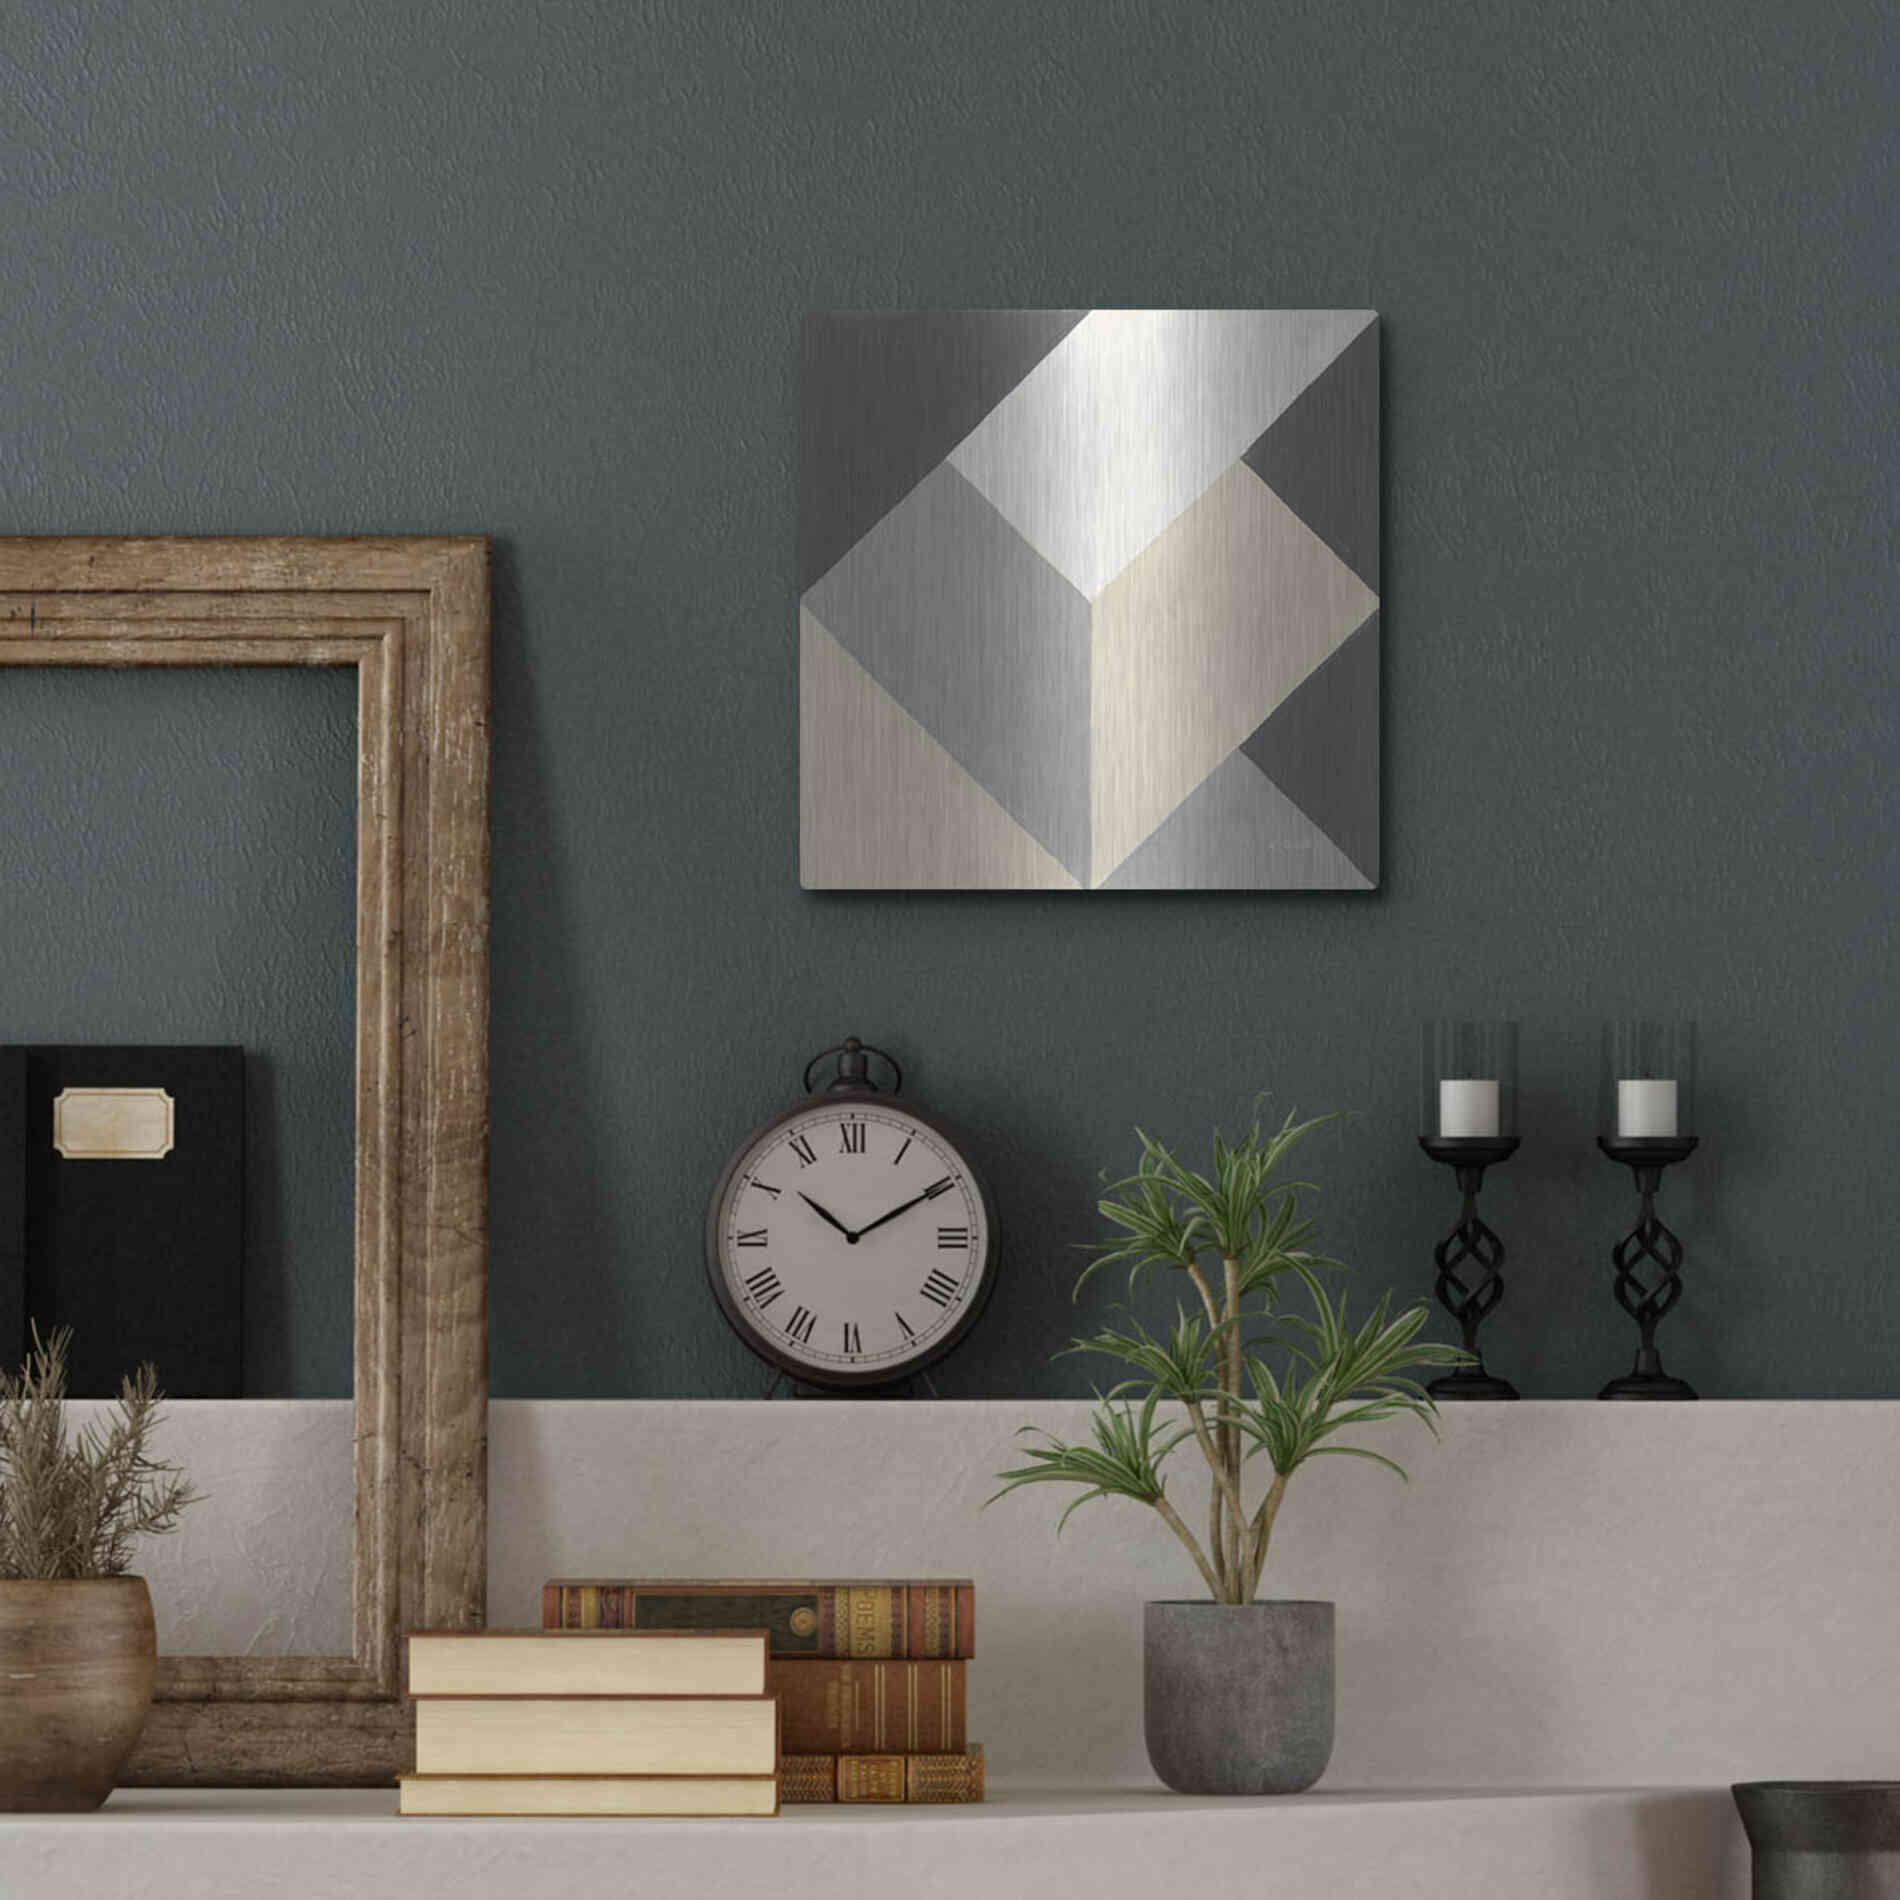 Luxe Metal Art 'Triangles I Neutral Crop' by Mike Schick, Metal Wall Art,12x12